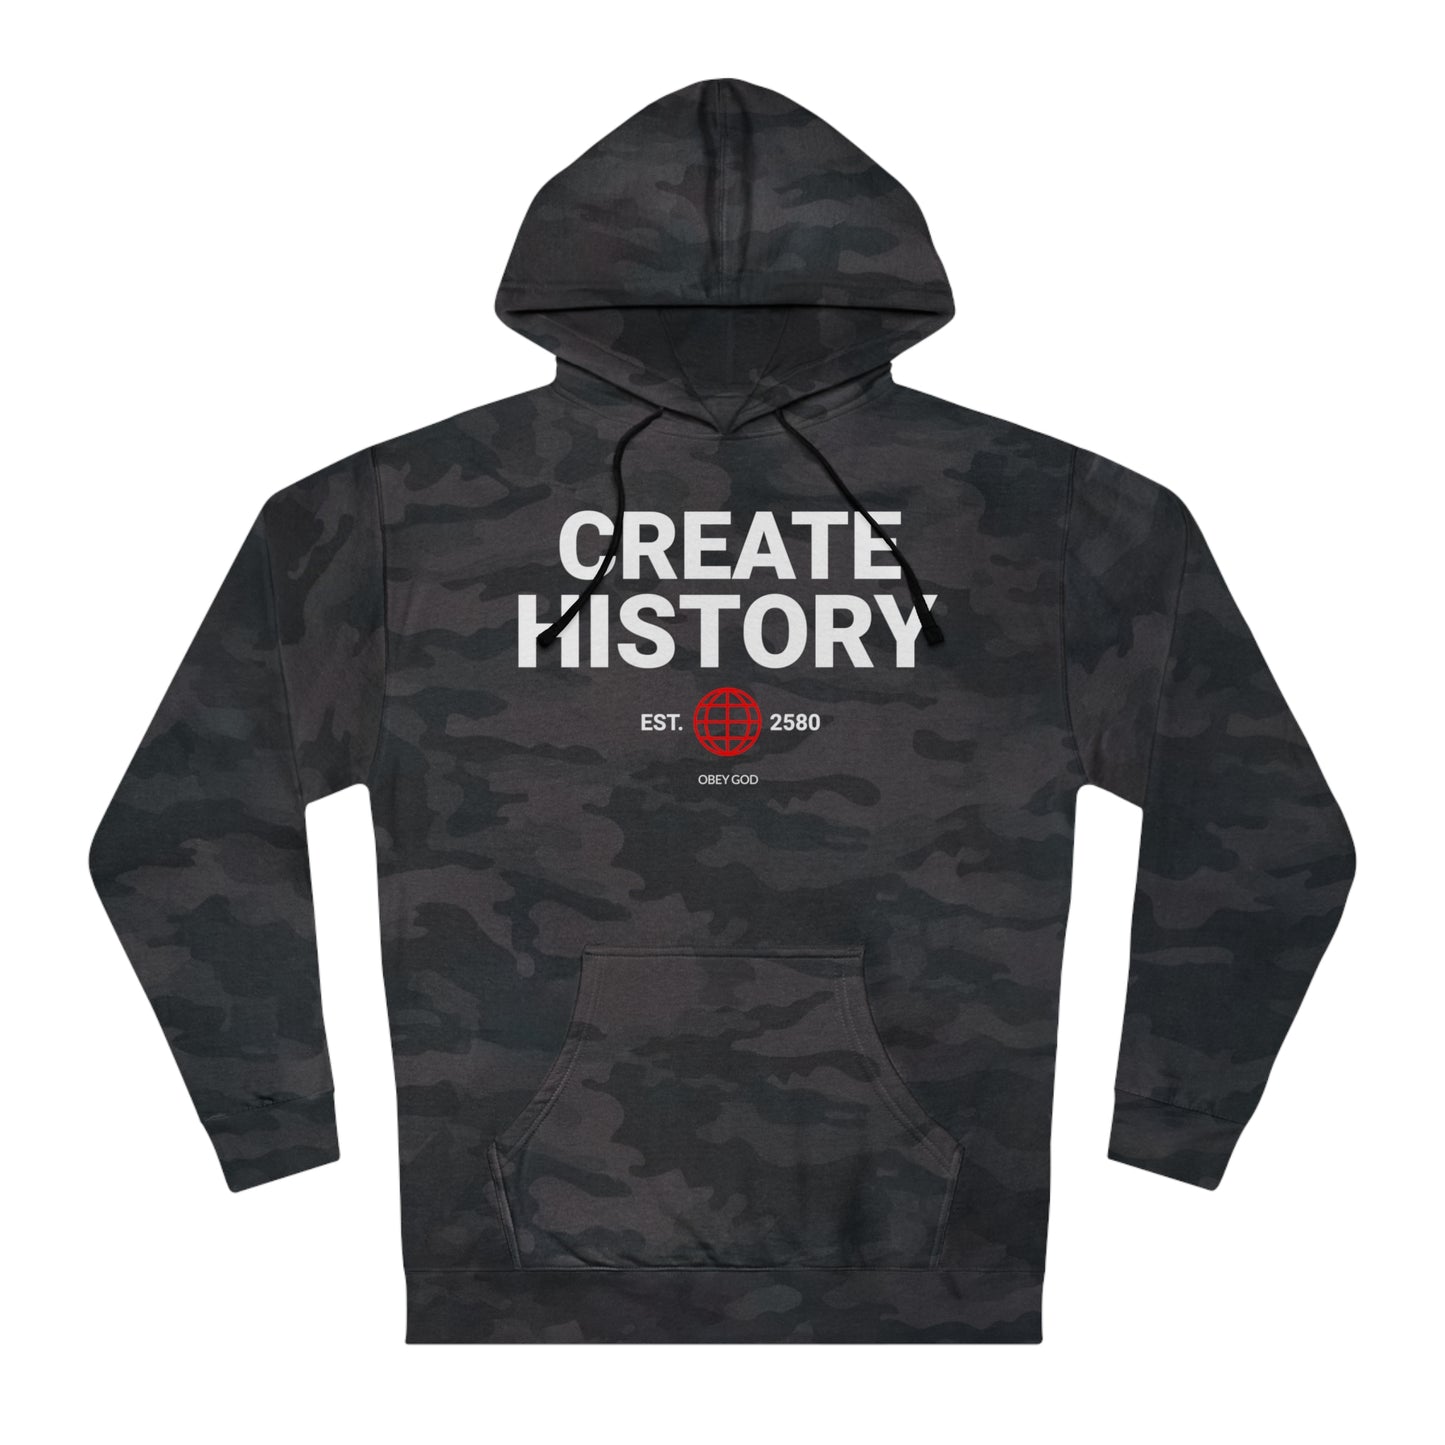 Stand out in style with our Camo Create History Hoodie, blending fashion with heritage. Perfect for trendsetters and history-makers alike. Shop now!